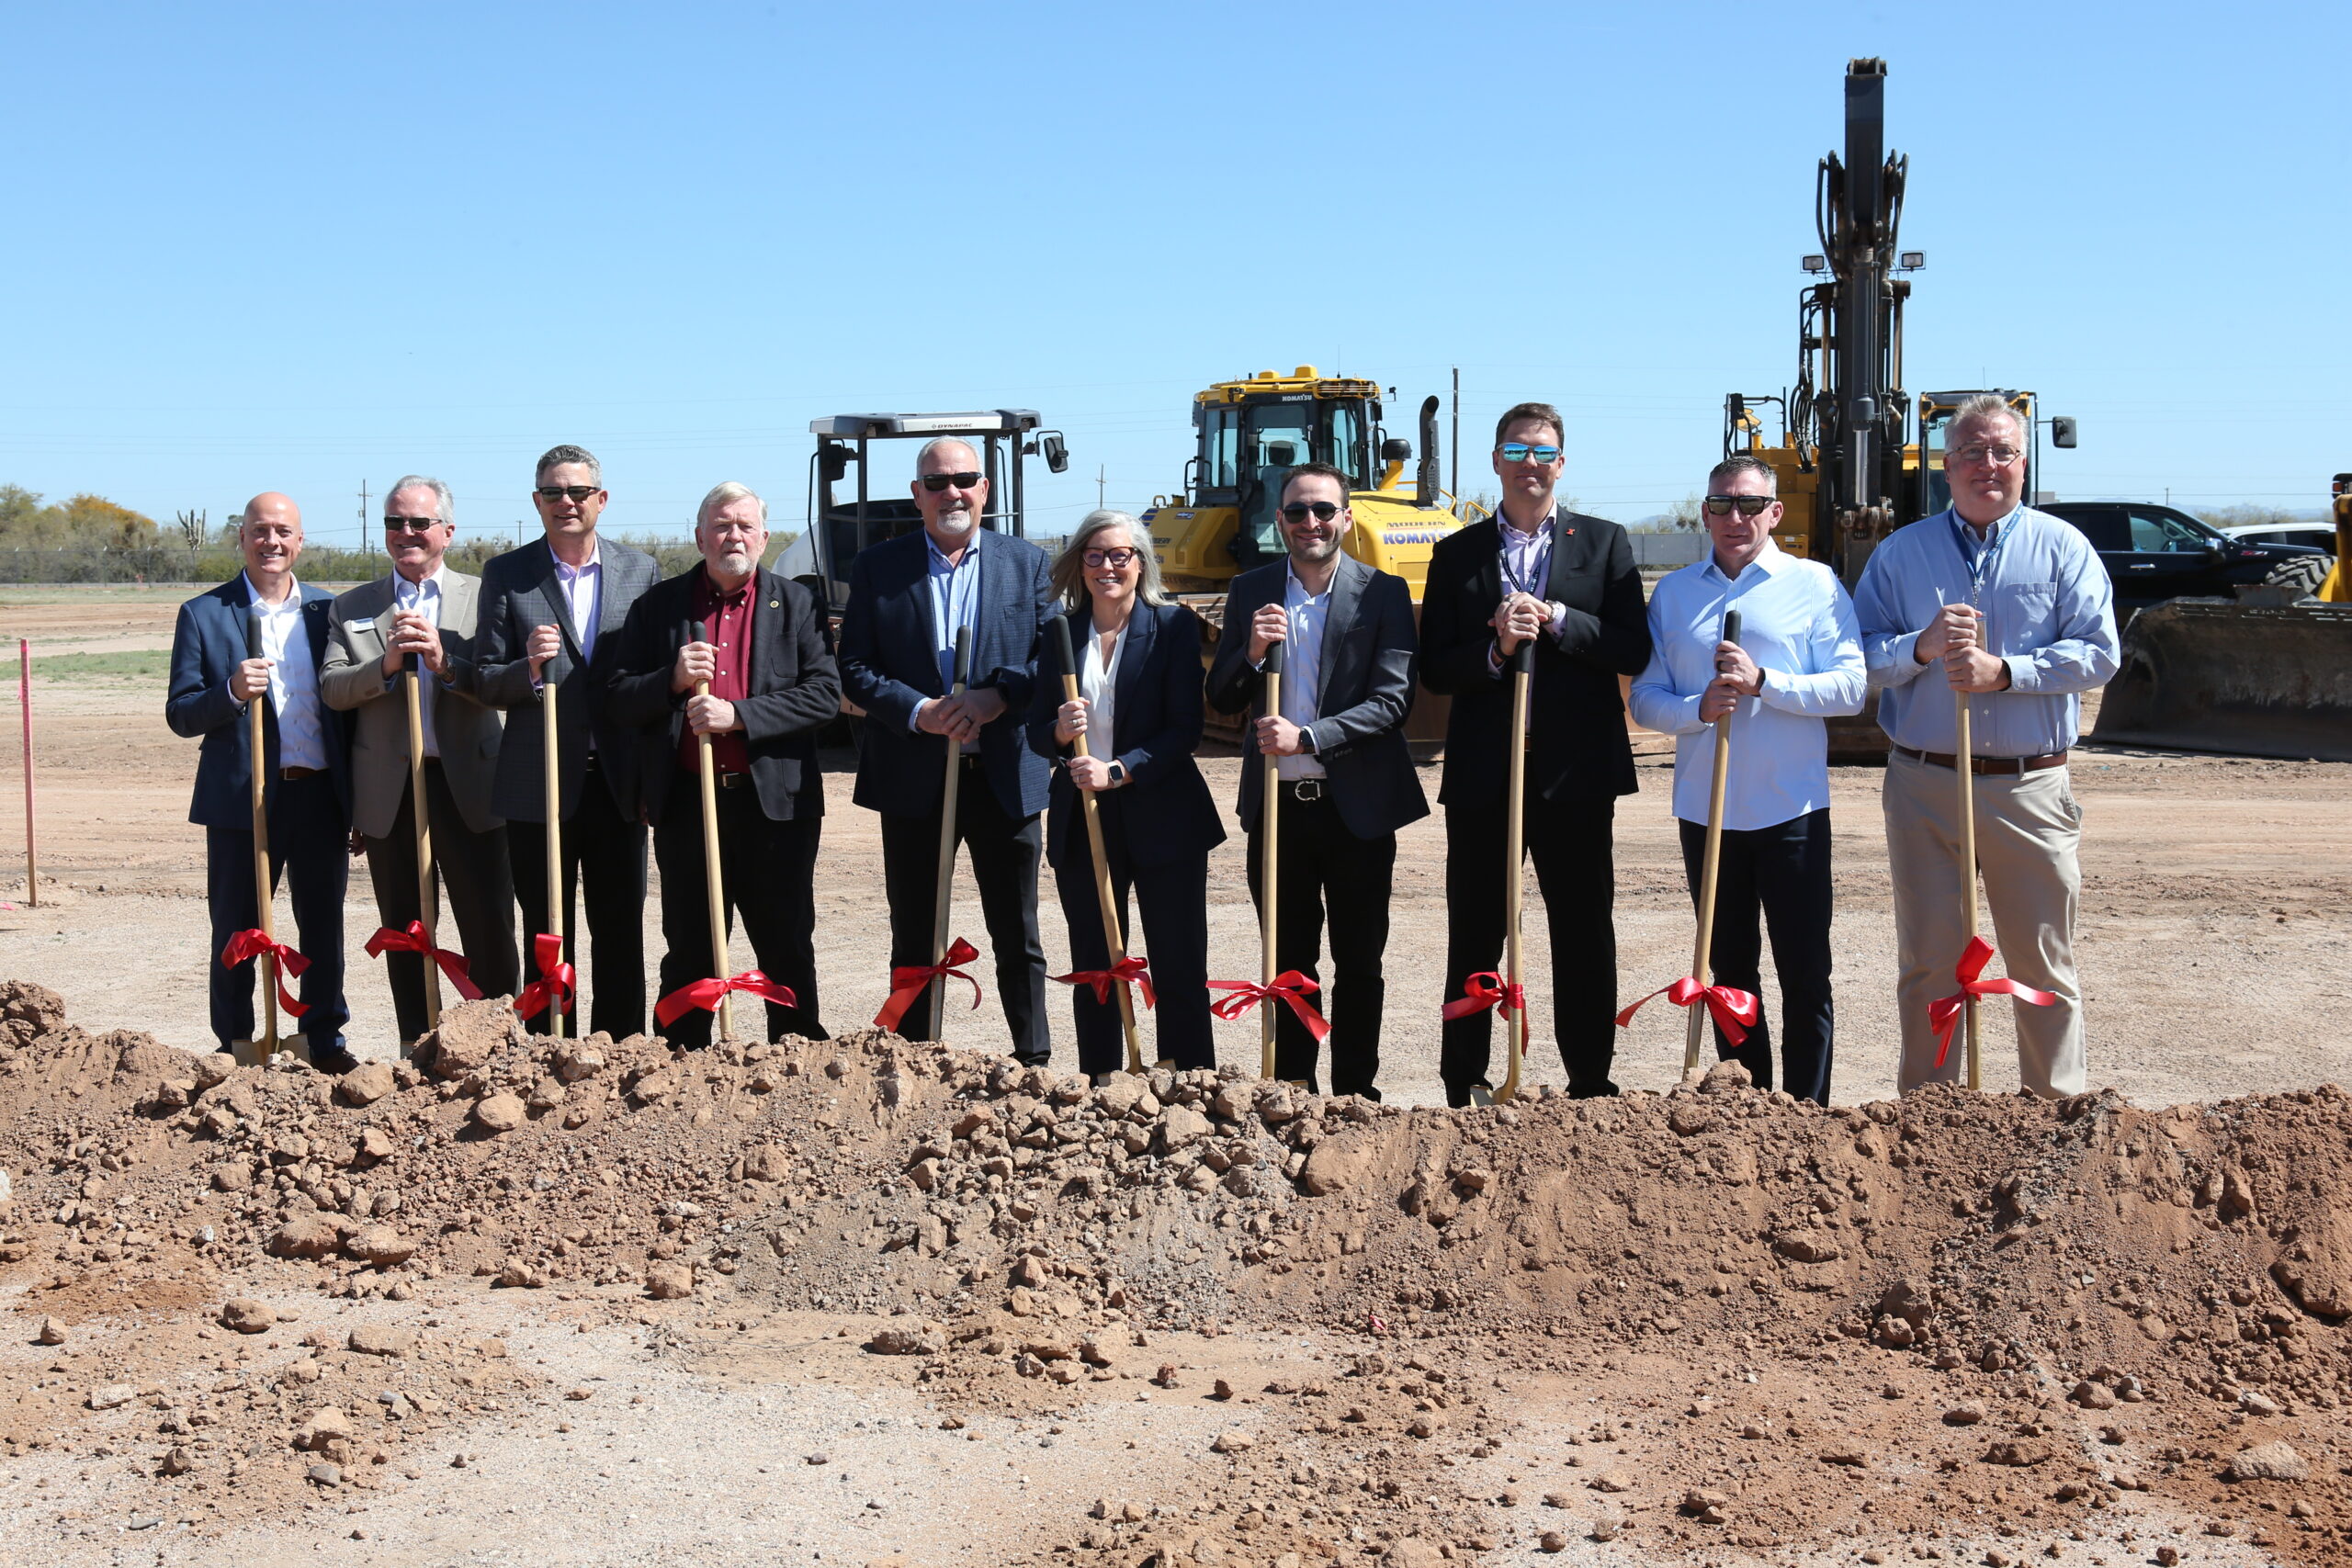 The official ground-breaking ceremony at Pinal Air Park in Marana, Arizona © Ascent Aviation Services